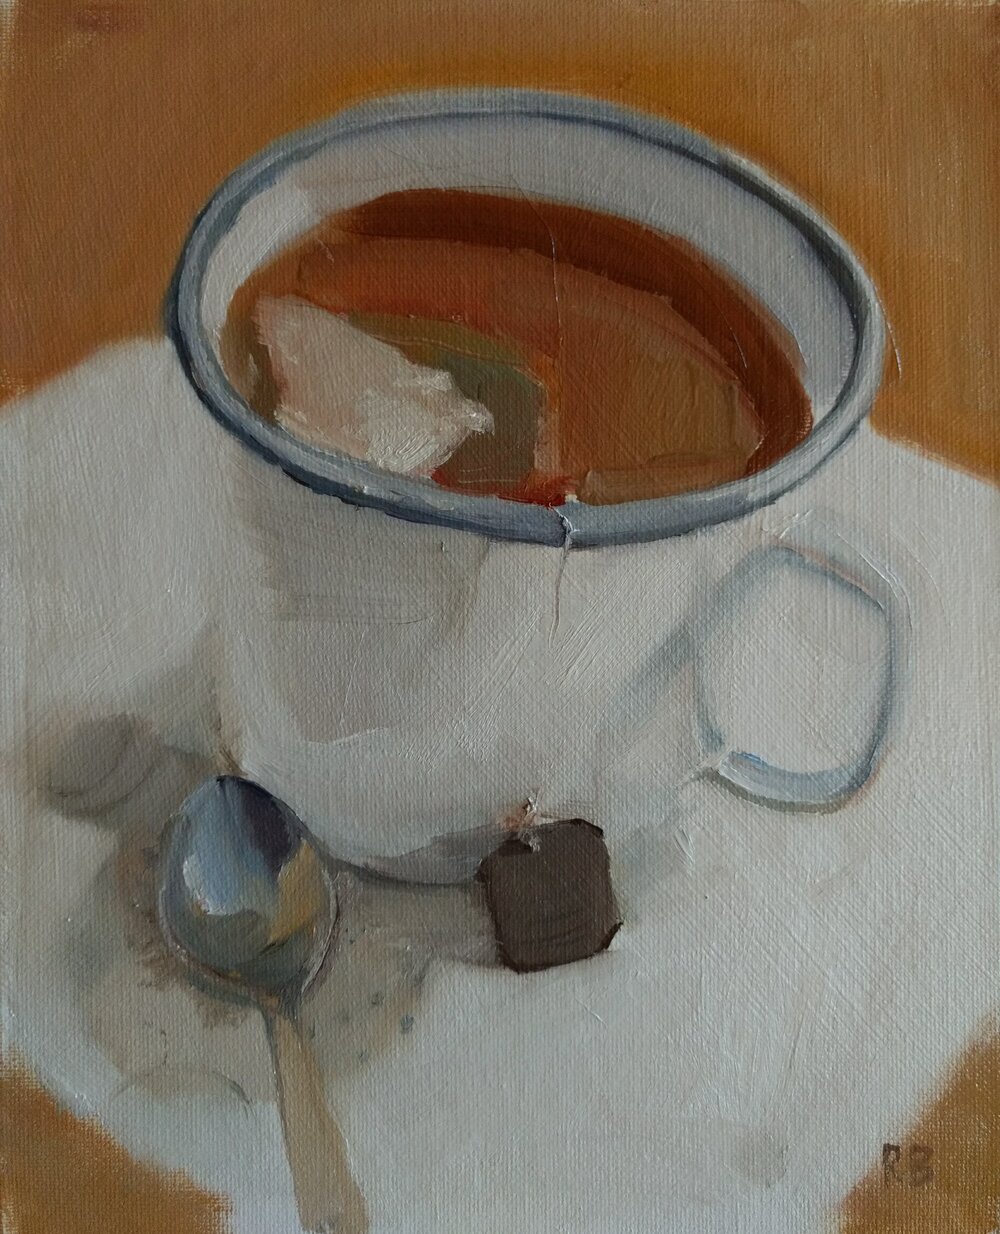  Tea bag and stain  Oil on board  20.4x25.5 cms  (framed) £600  A simple composition involving a white enamel tea cup, tea bag and stain on a diagonally placed napkin. This piece was shown in 2019 at the Royal Institute of Oil painters exhibition in 